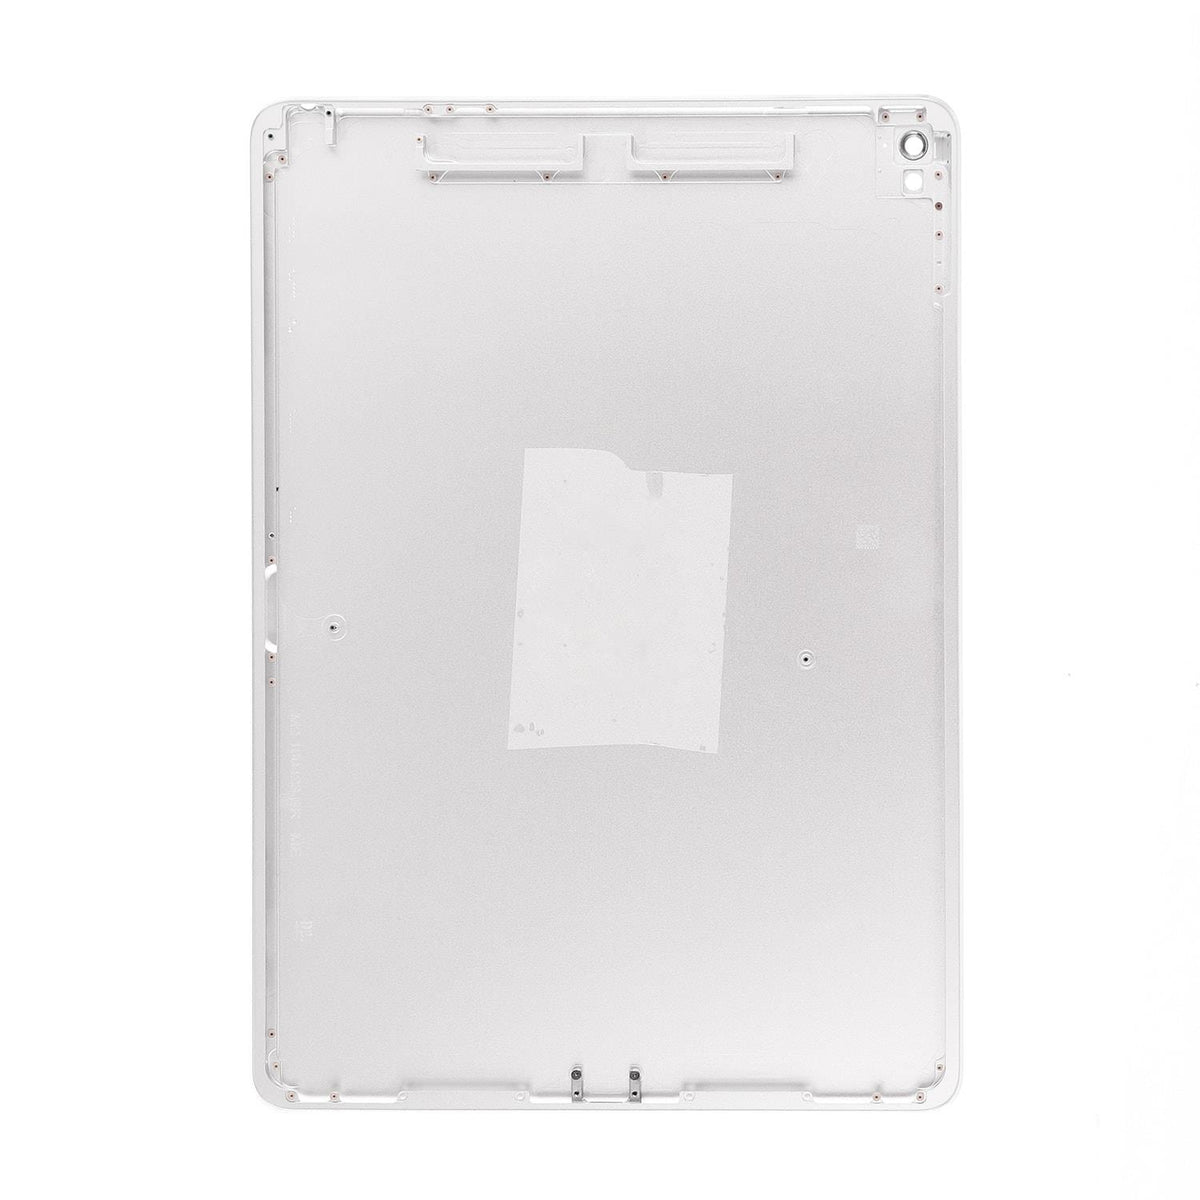 BACK COVER WIFI VERSION FOR IPAD PRO 9.7"- SILVER